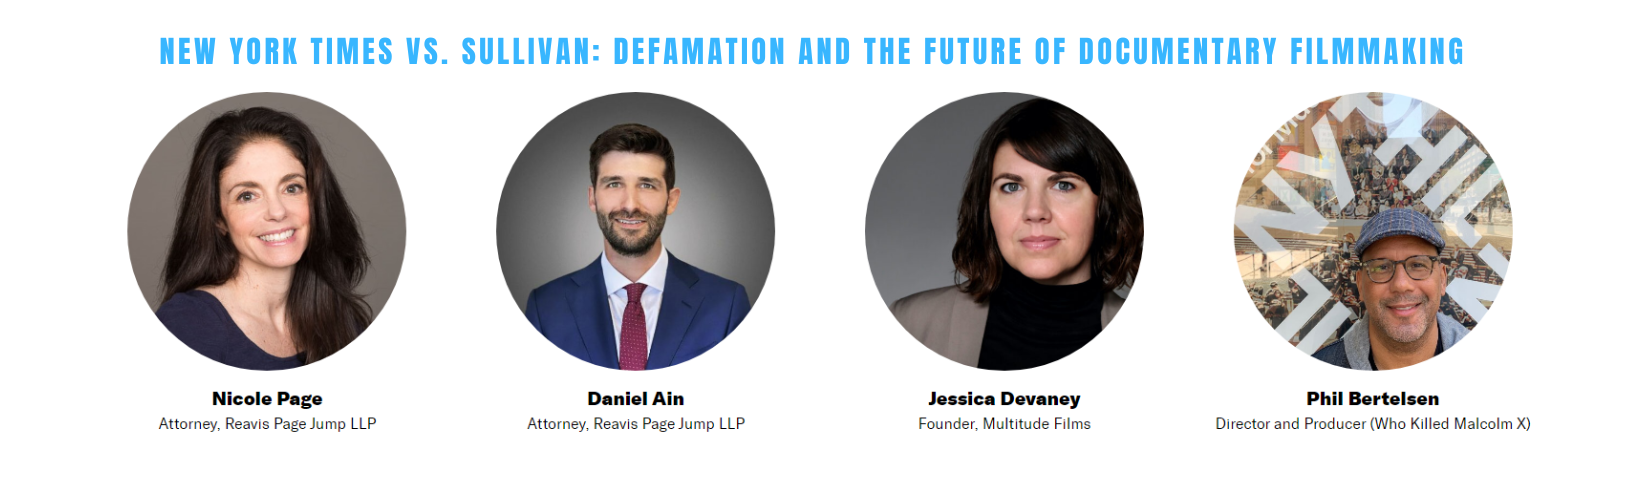 RPJ Partner Nicole Page and Senior Associate Daniel Ain to be Featured on DOC NYC PRO Panel, Friday 11/11